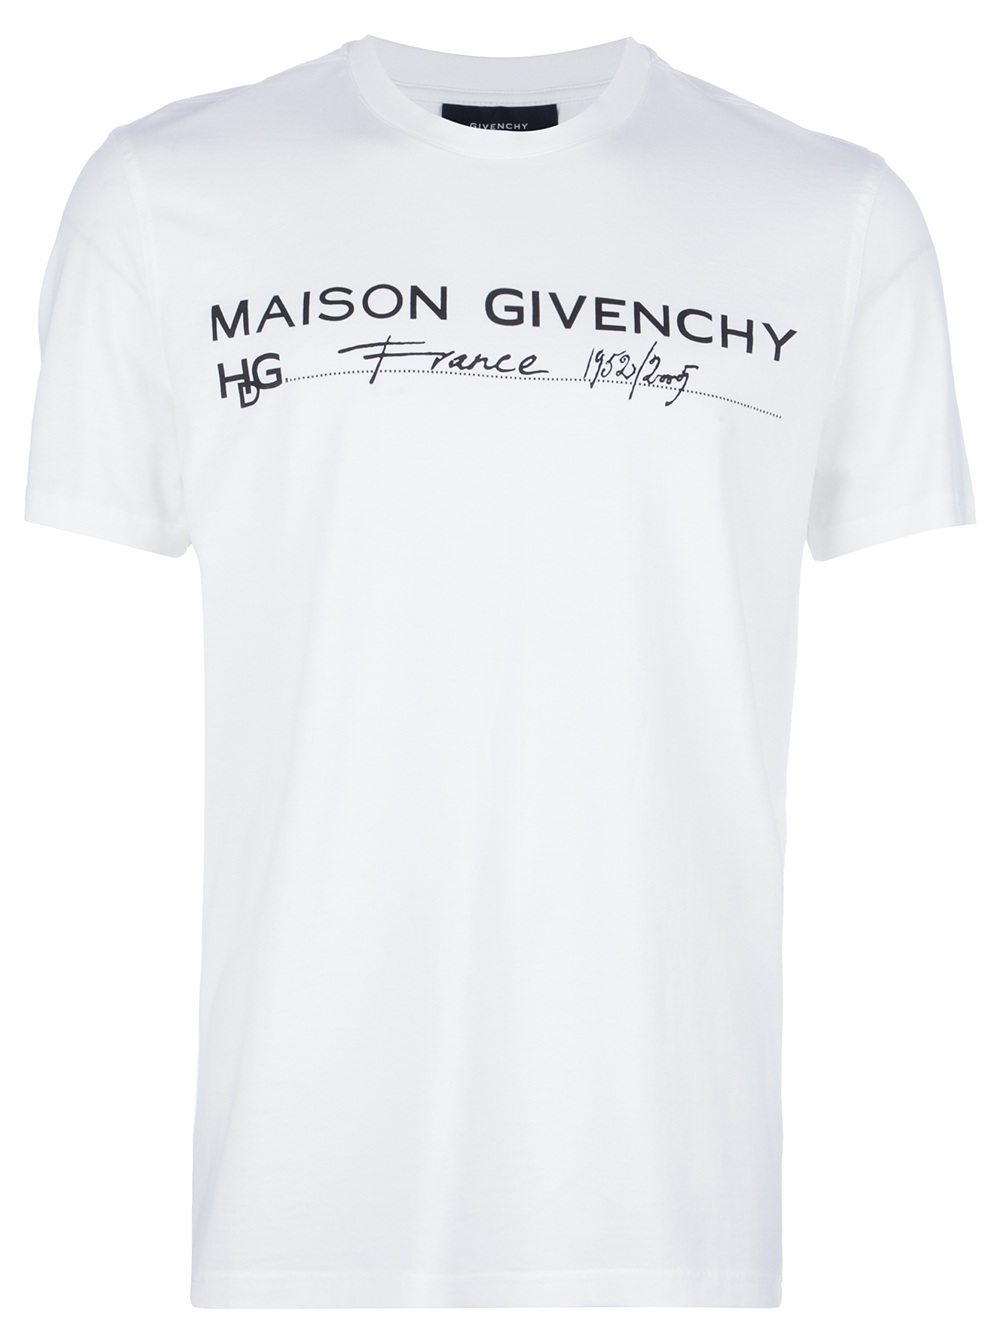 Givenchy Maison Givenchy Tshirt in White for Men | Lyst